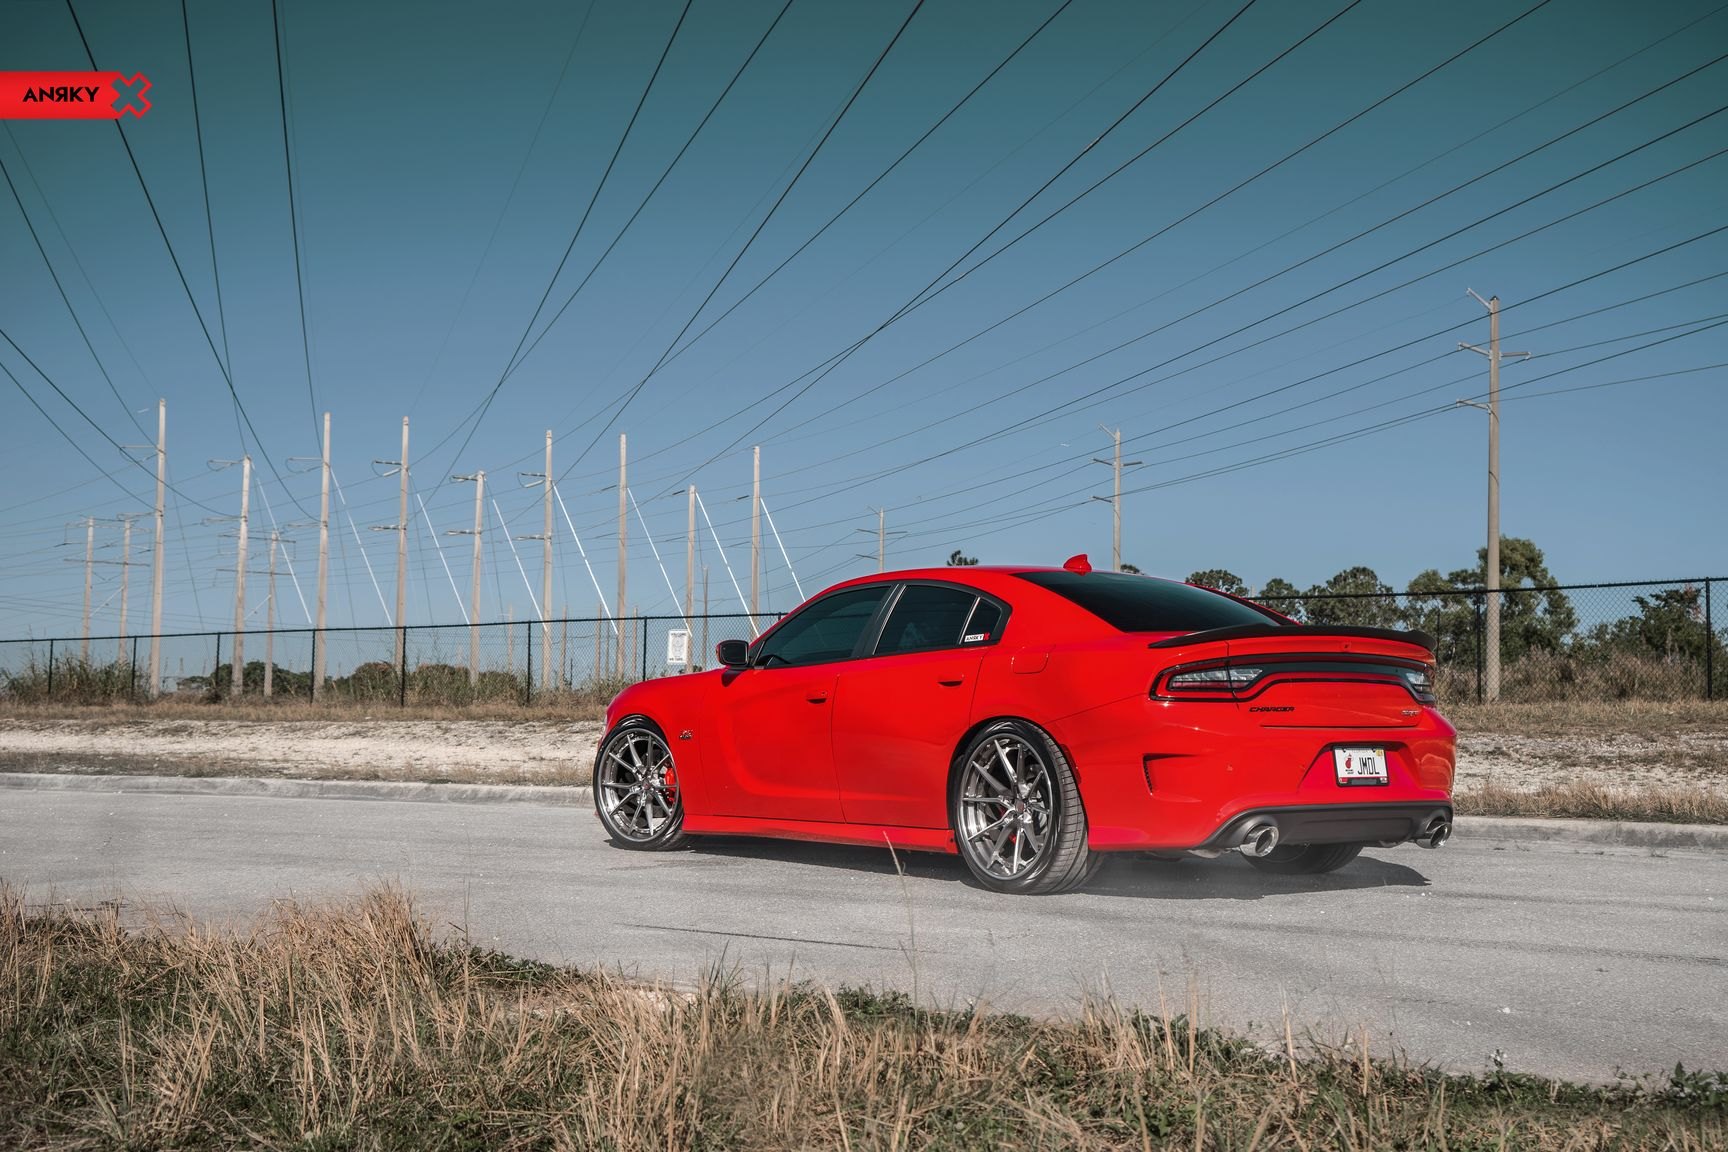 Red Dodge Charger with Aftermarket Rear Spoiler - Photo by Anrky Wheels